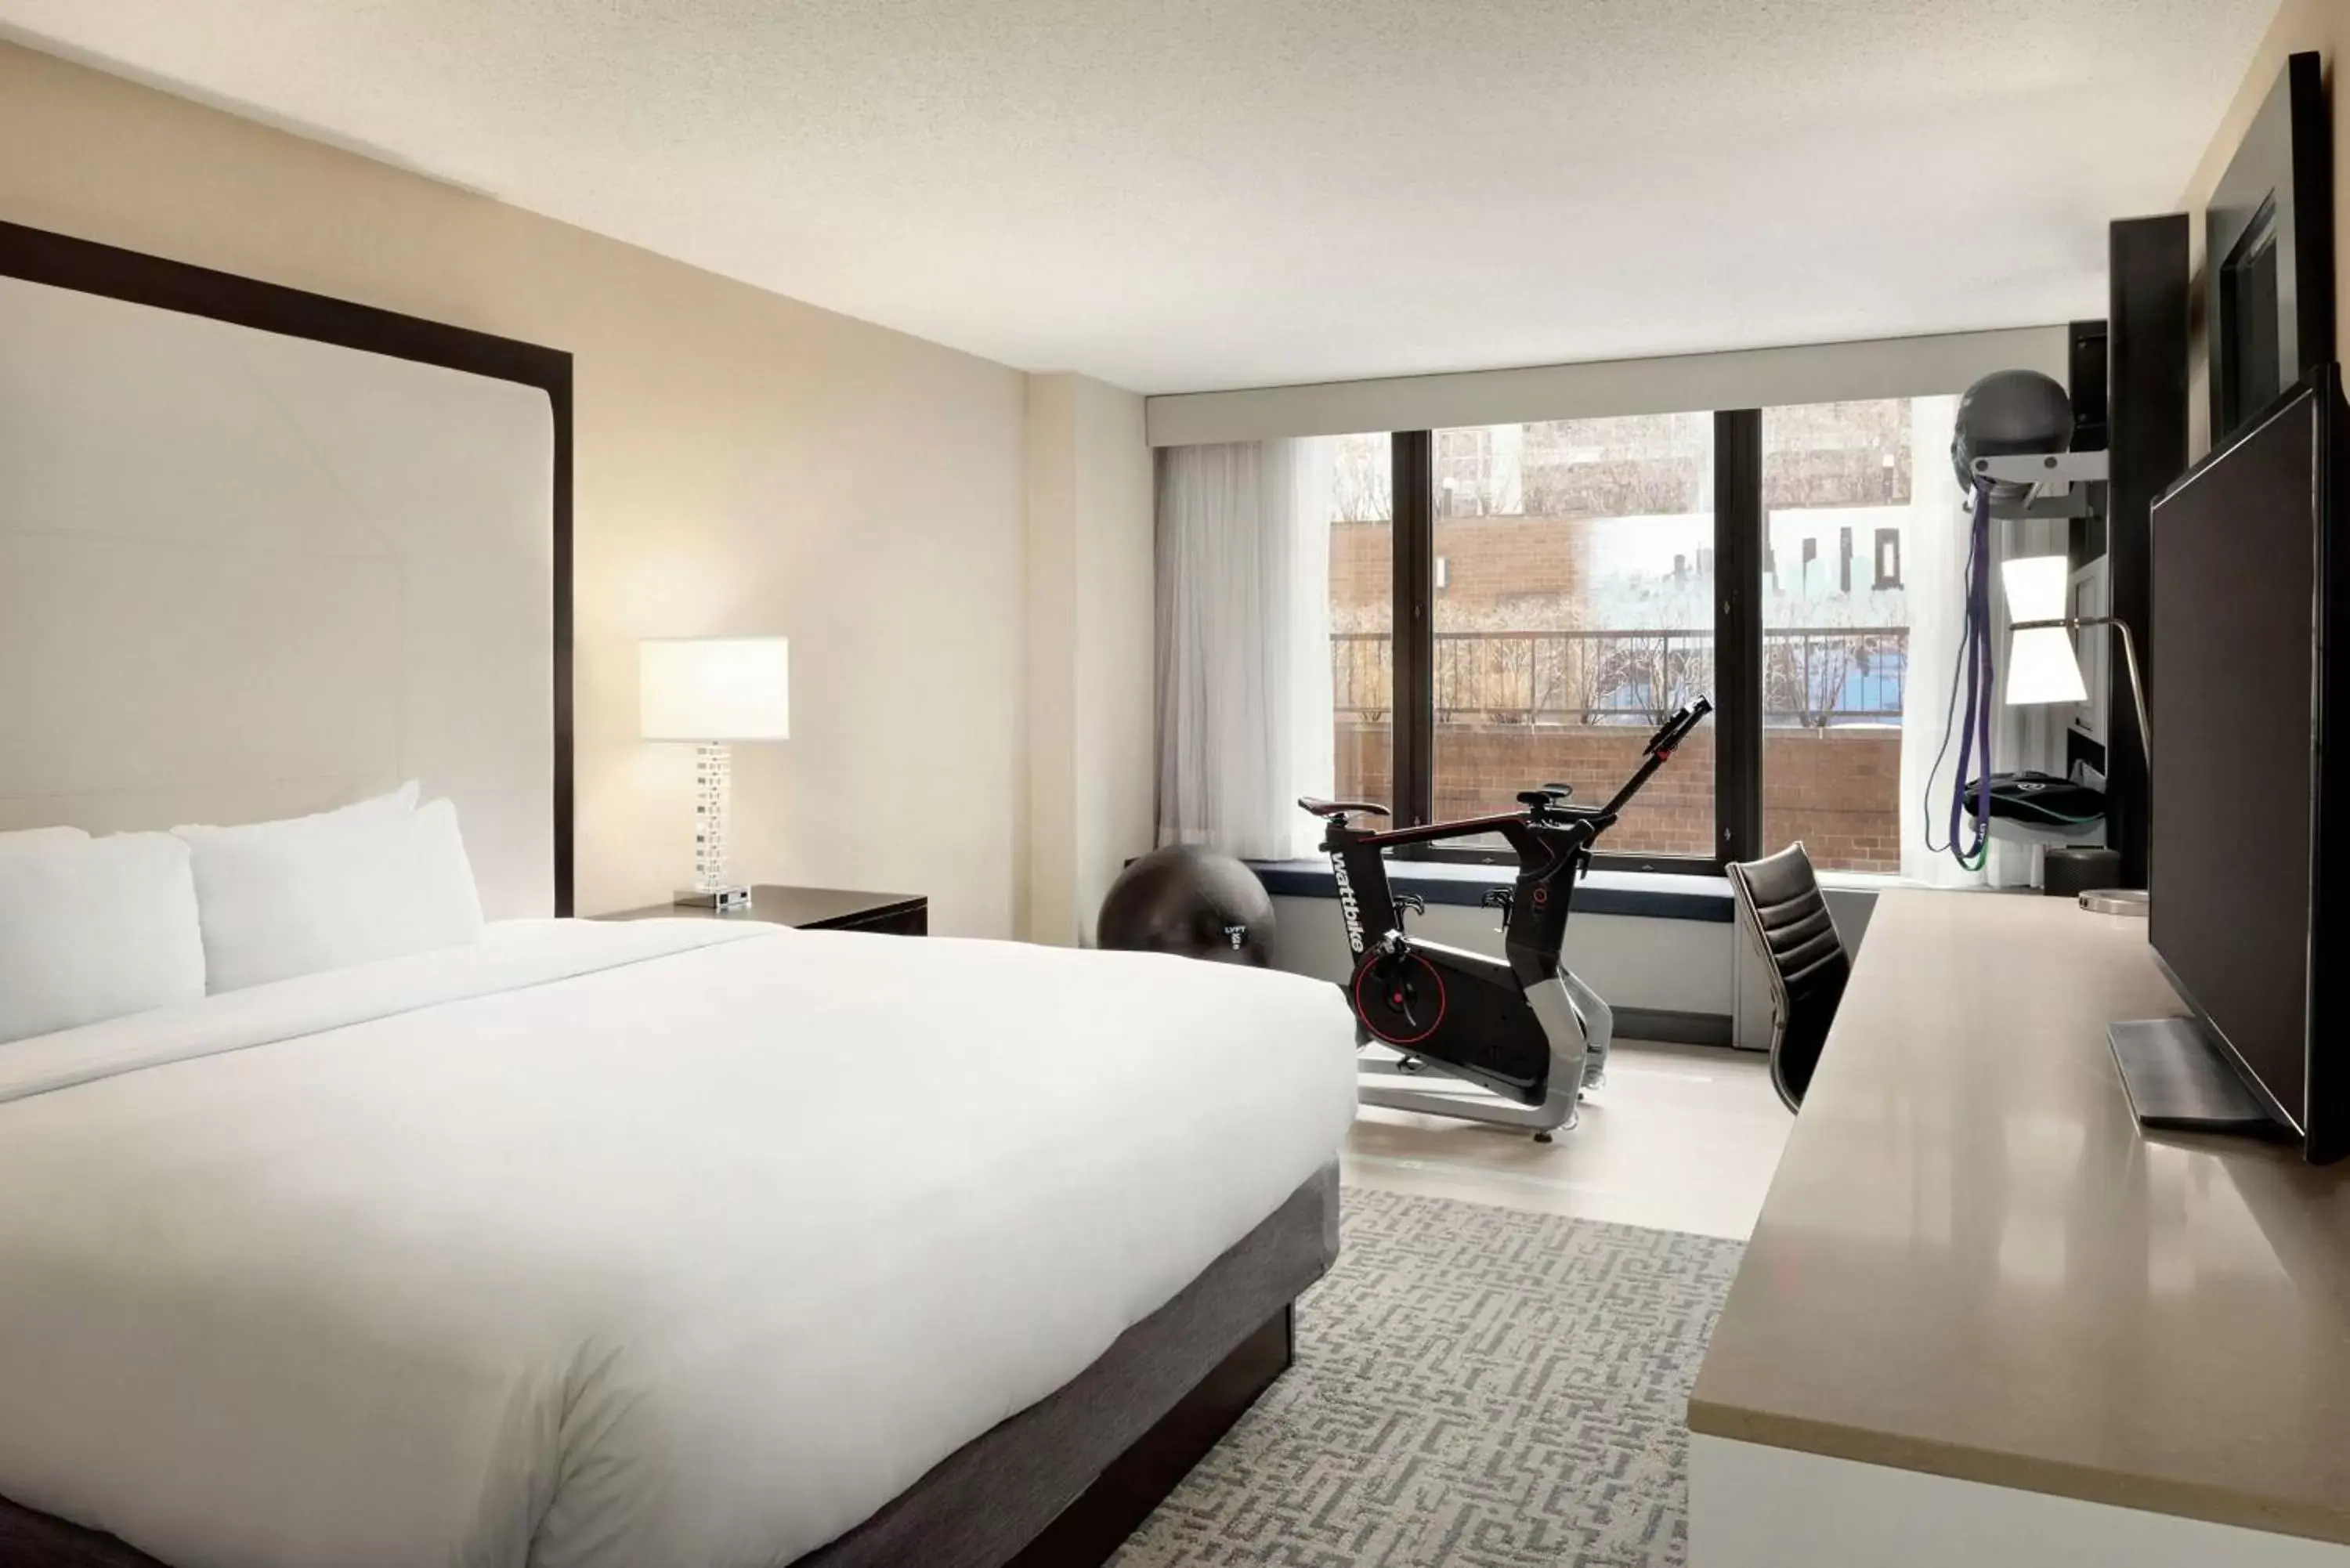 Bedroom in DoubleTree by Hilton Chicago Magnificent Mile